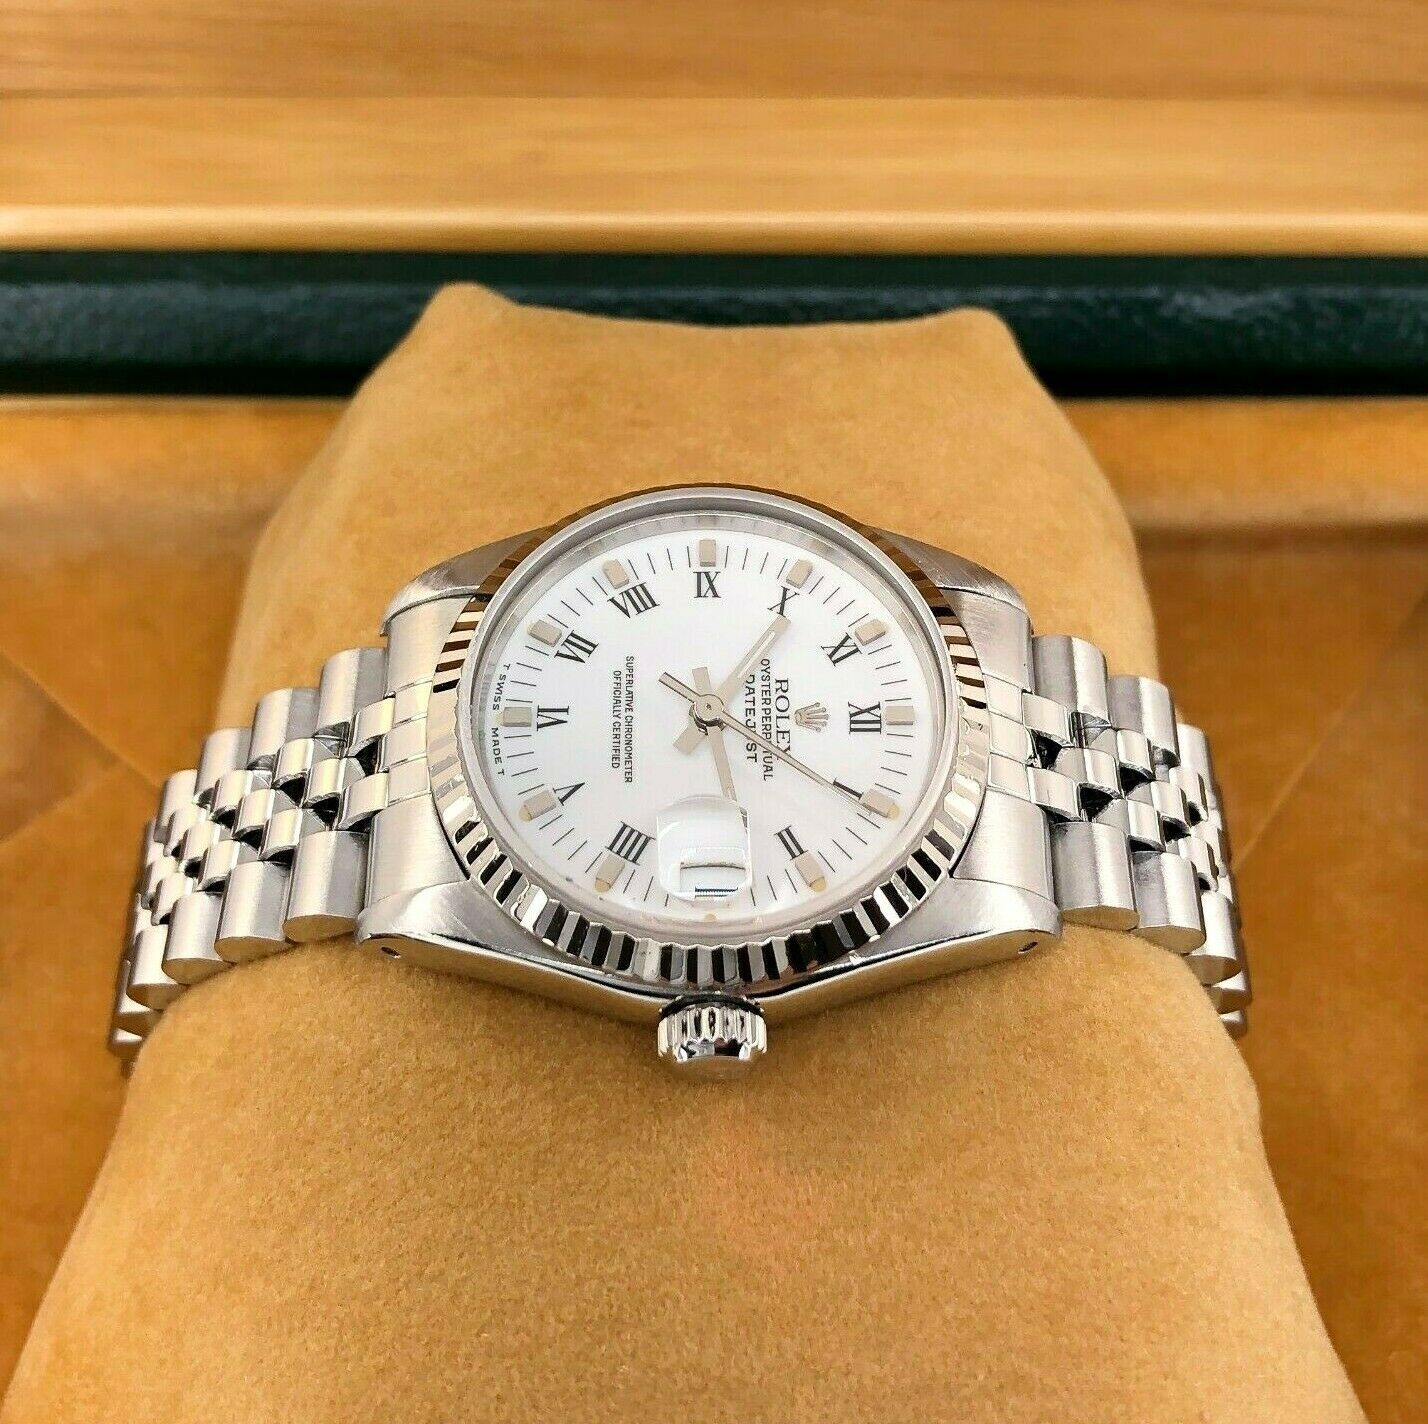 Rolex 31MM Lady's Jubilee Datejust Watch 18K White Gold/Stainless Ref # 68274